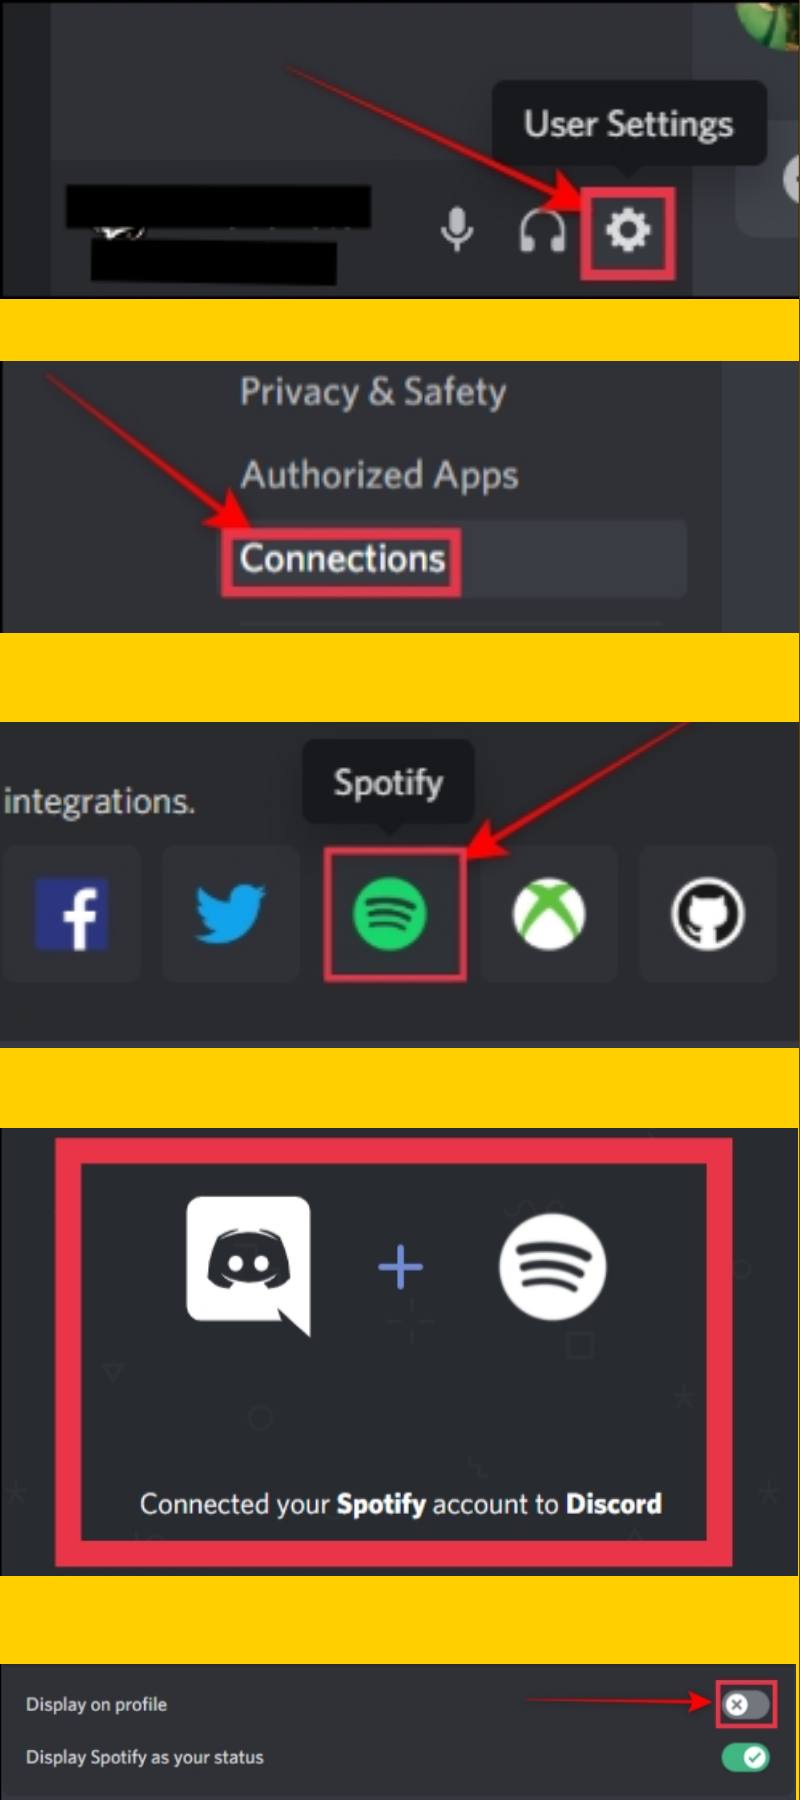 Connecting Spotify Account to Discord (step-by-step picture guide)